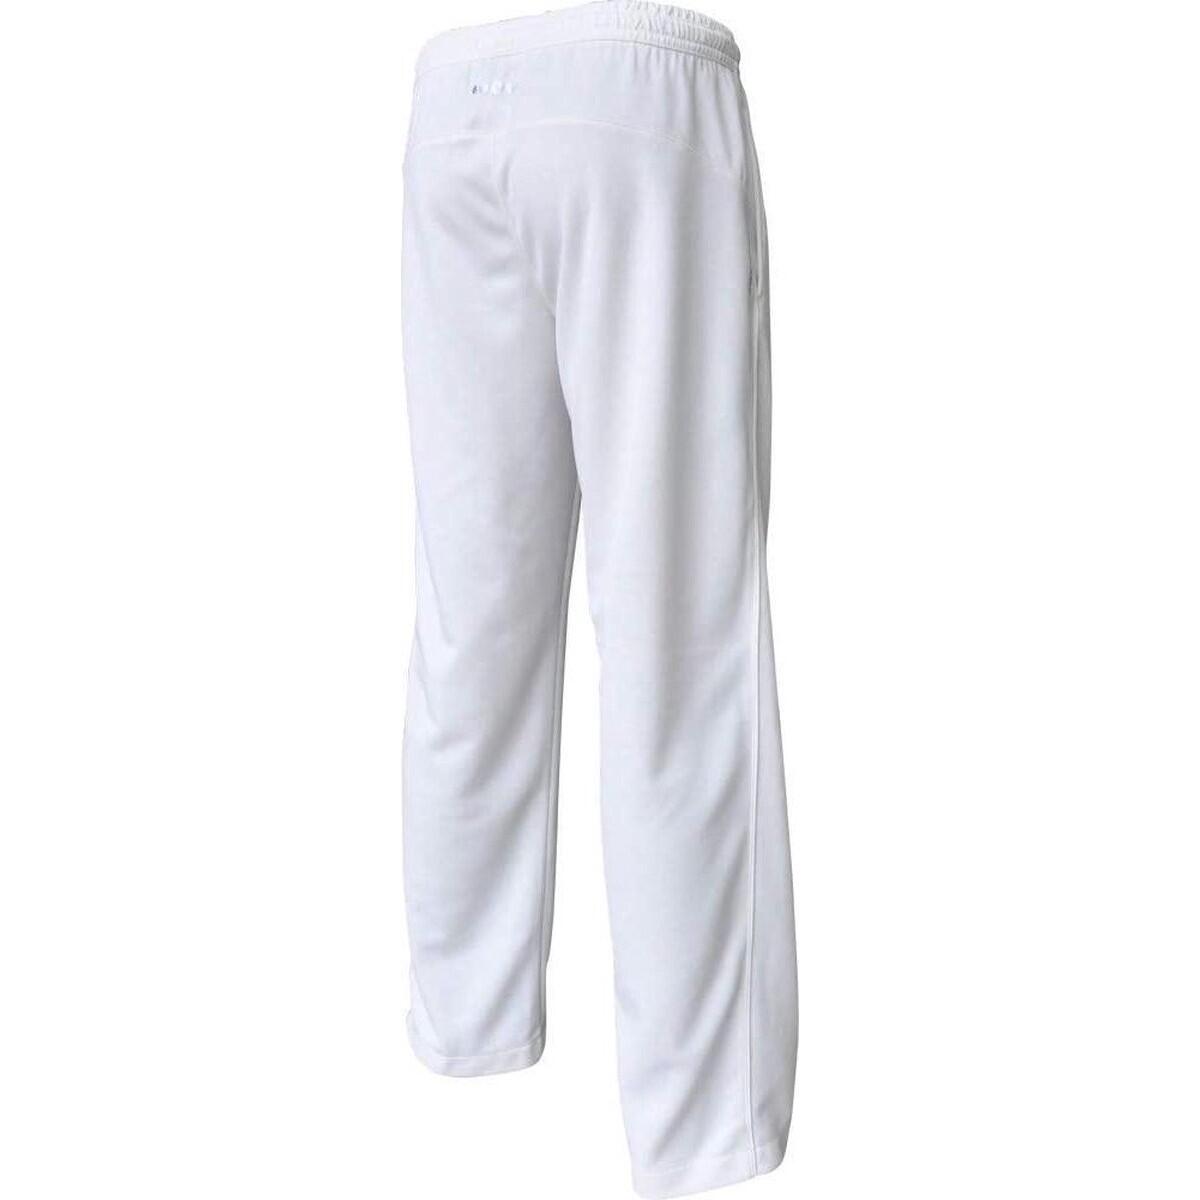 Mens Pro Players Cricket Trousers (White) 2/2